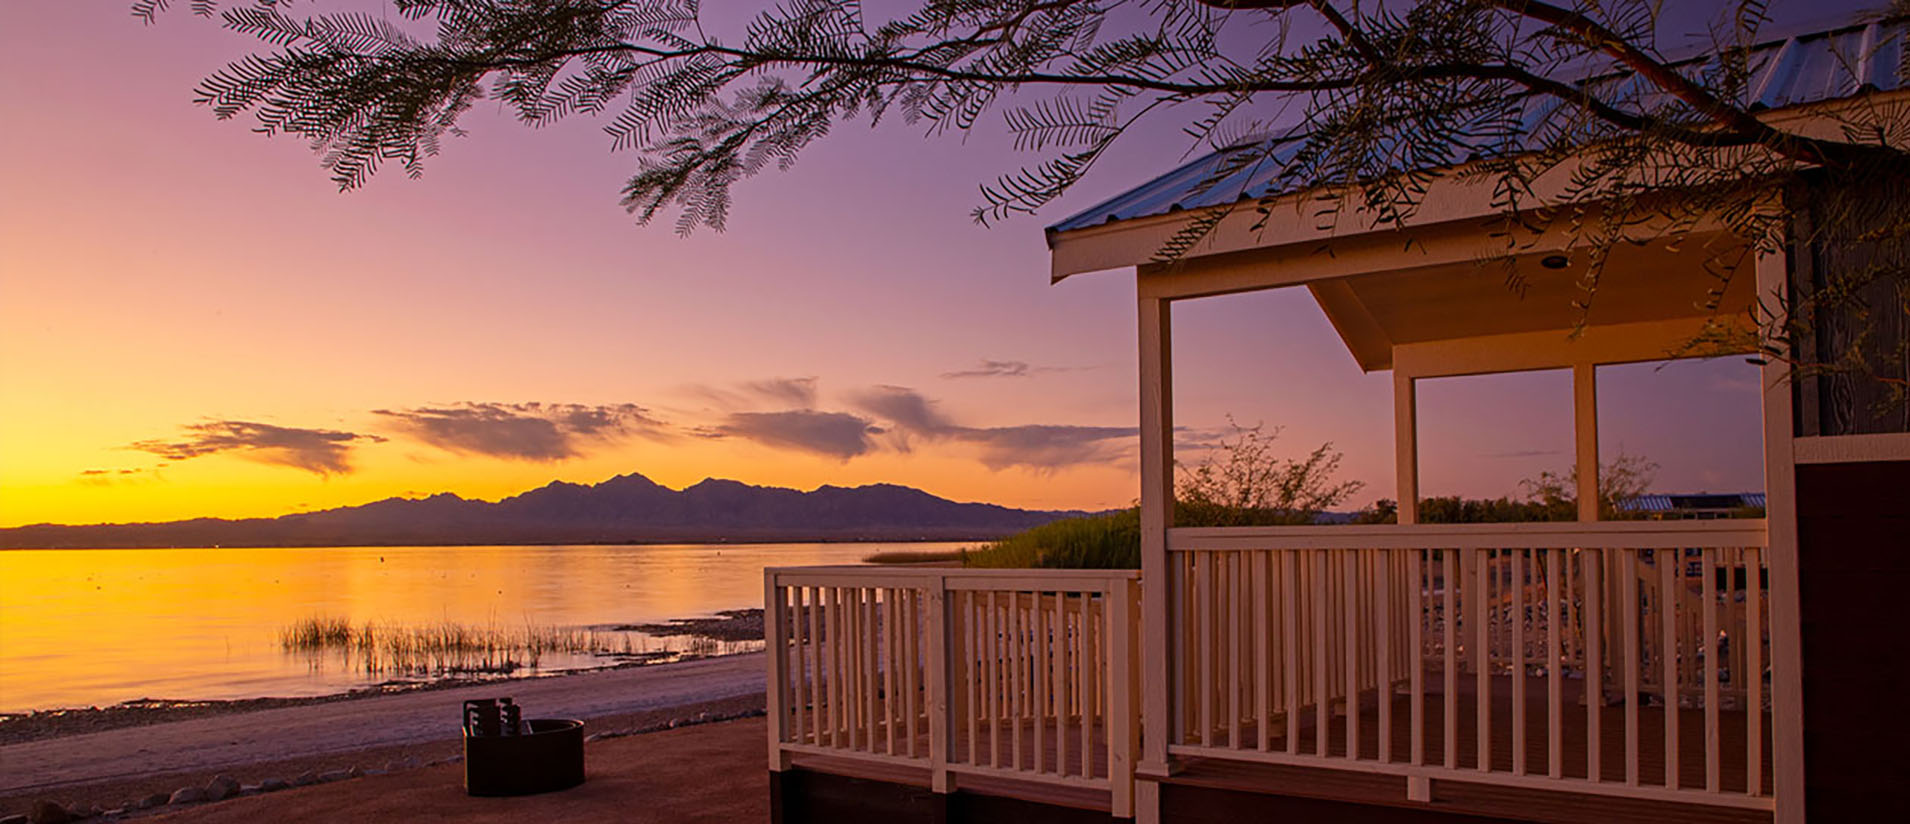 Sunset view from one of the rental cabins on the Colorado River at Lake Havasu State Park